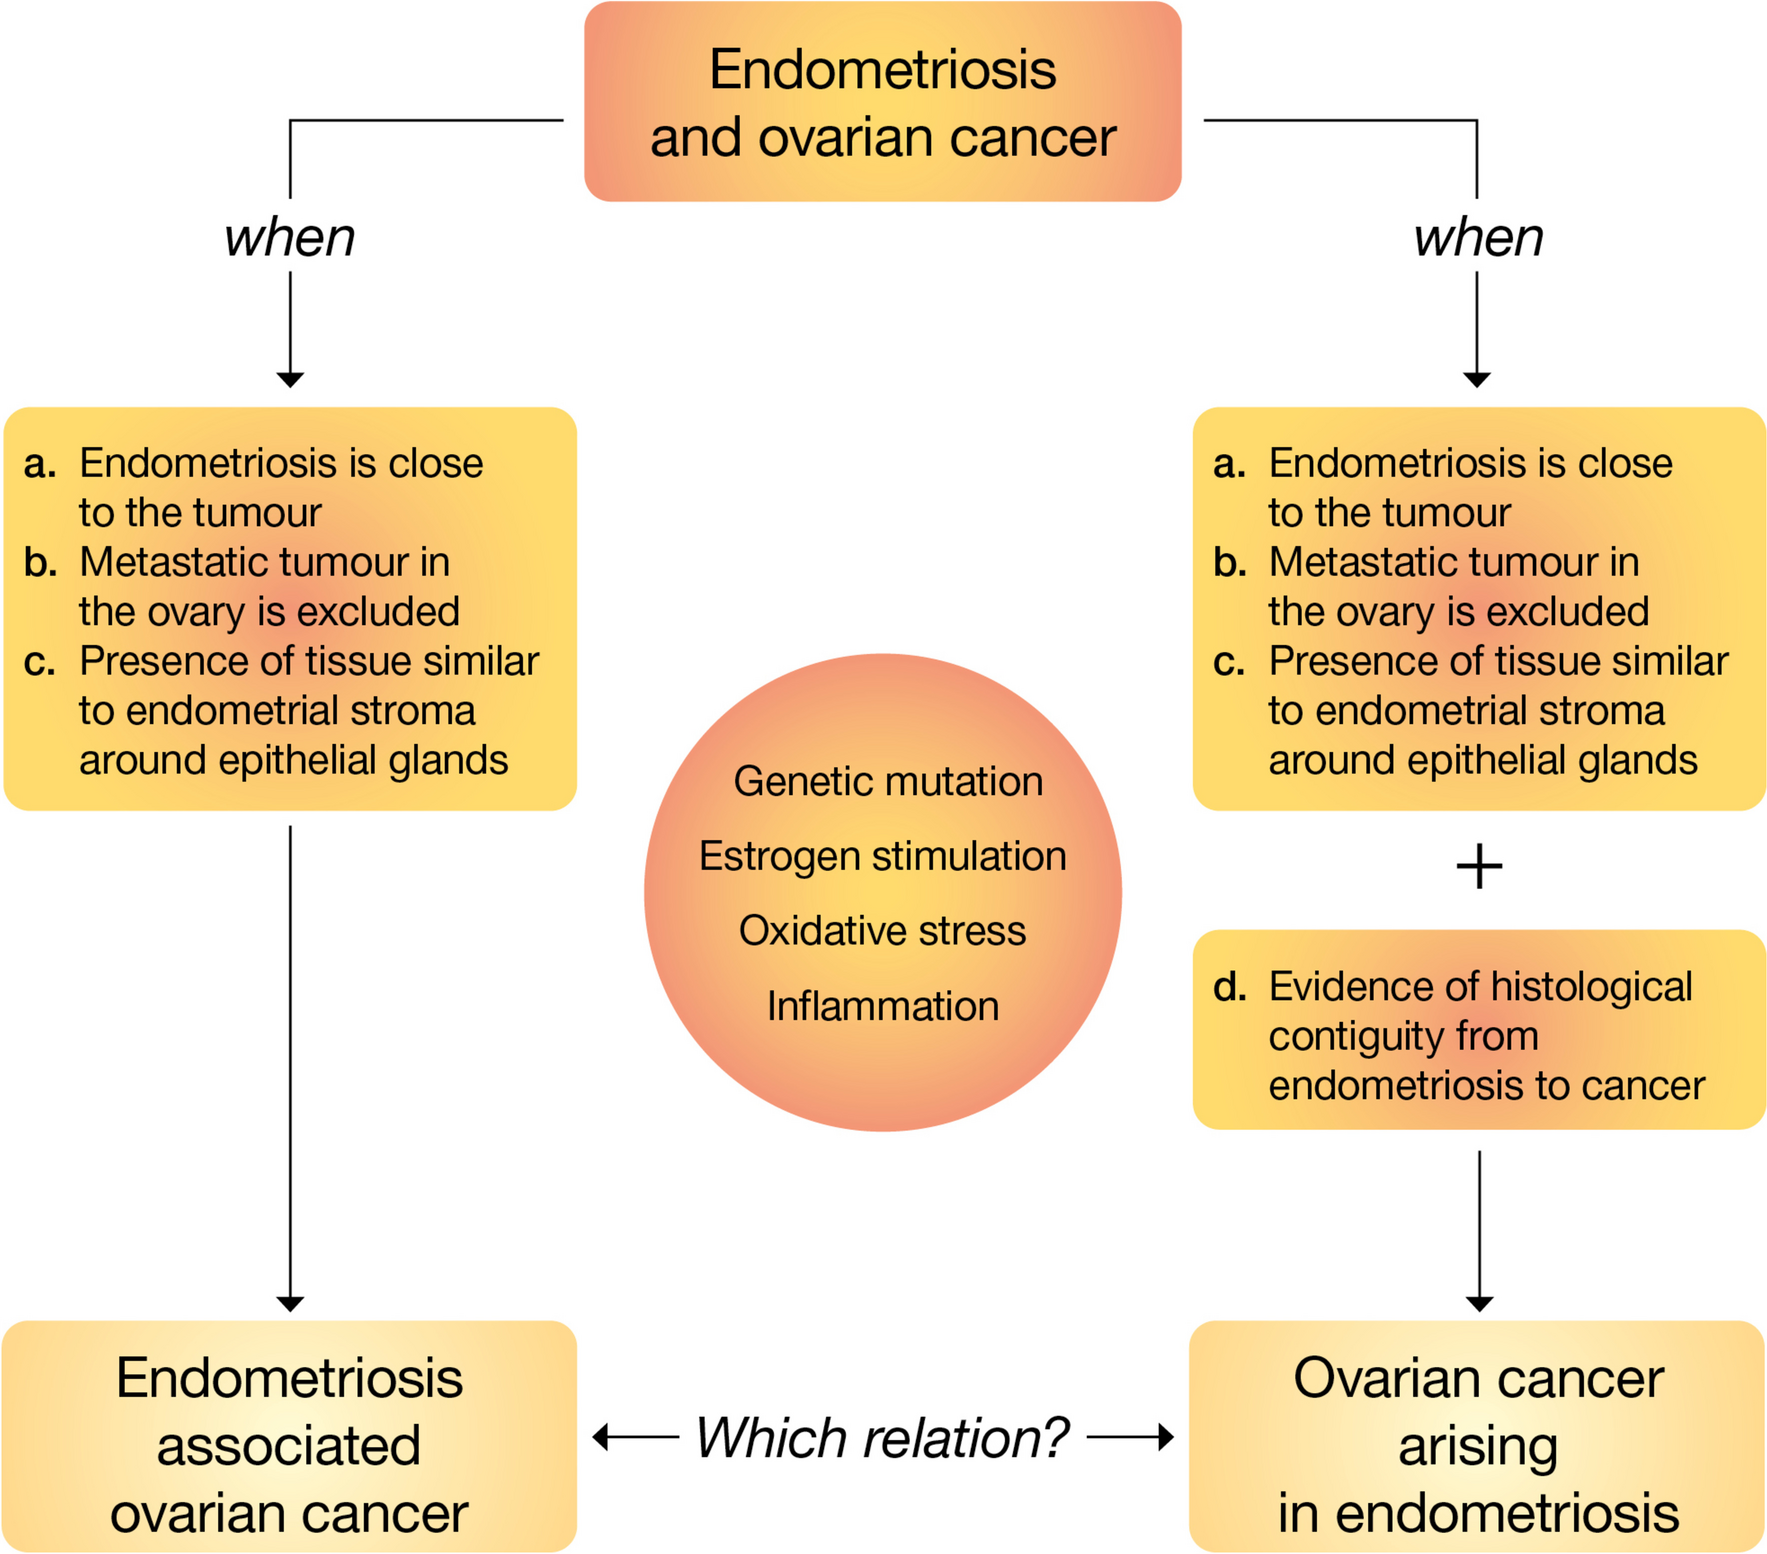 Histologic Subtypes in Endometriosis-Associated Ovarian Cancer and Ovarian Cancer Arising in Endometriosis: A Systematic Review and Meta-Analysis